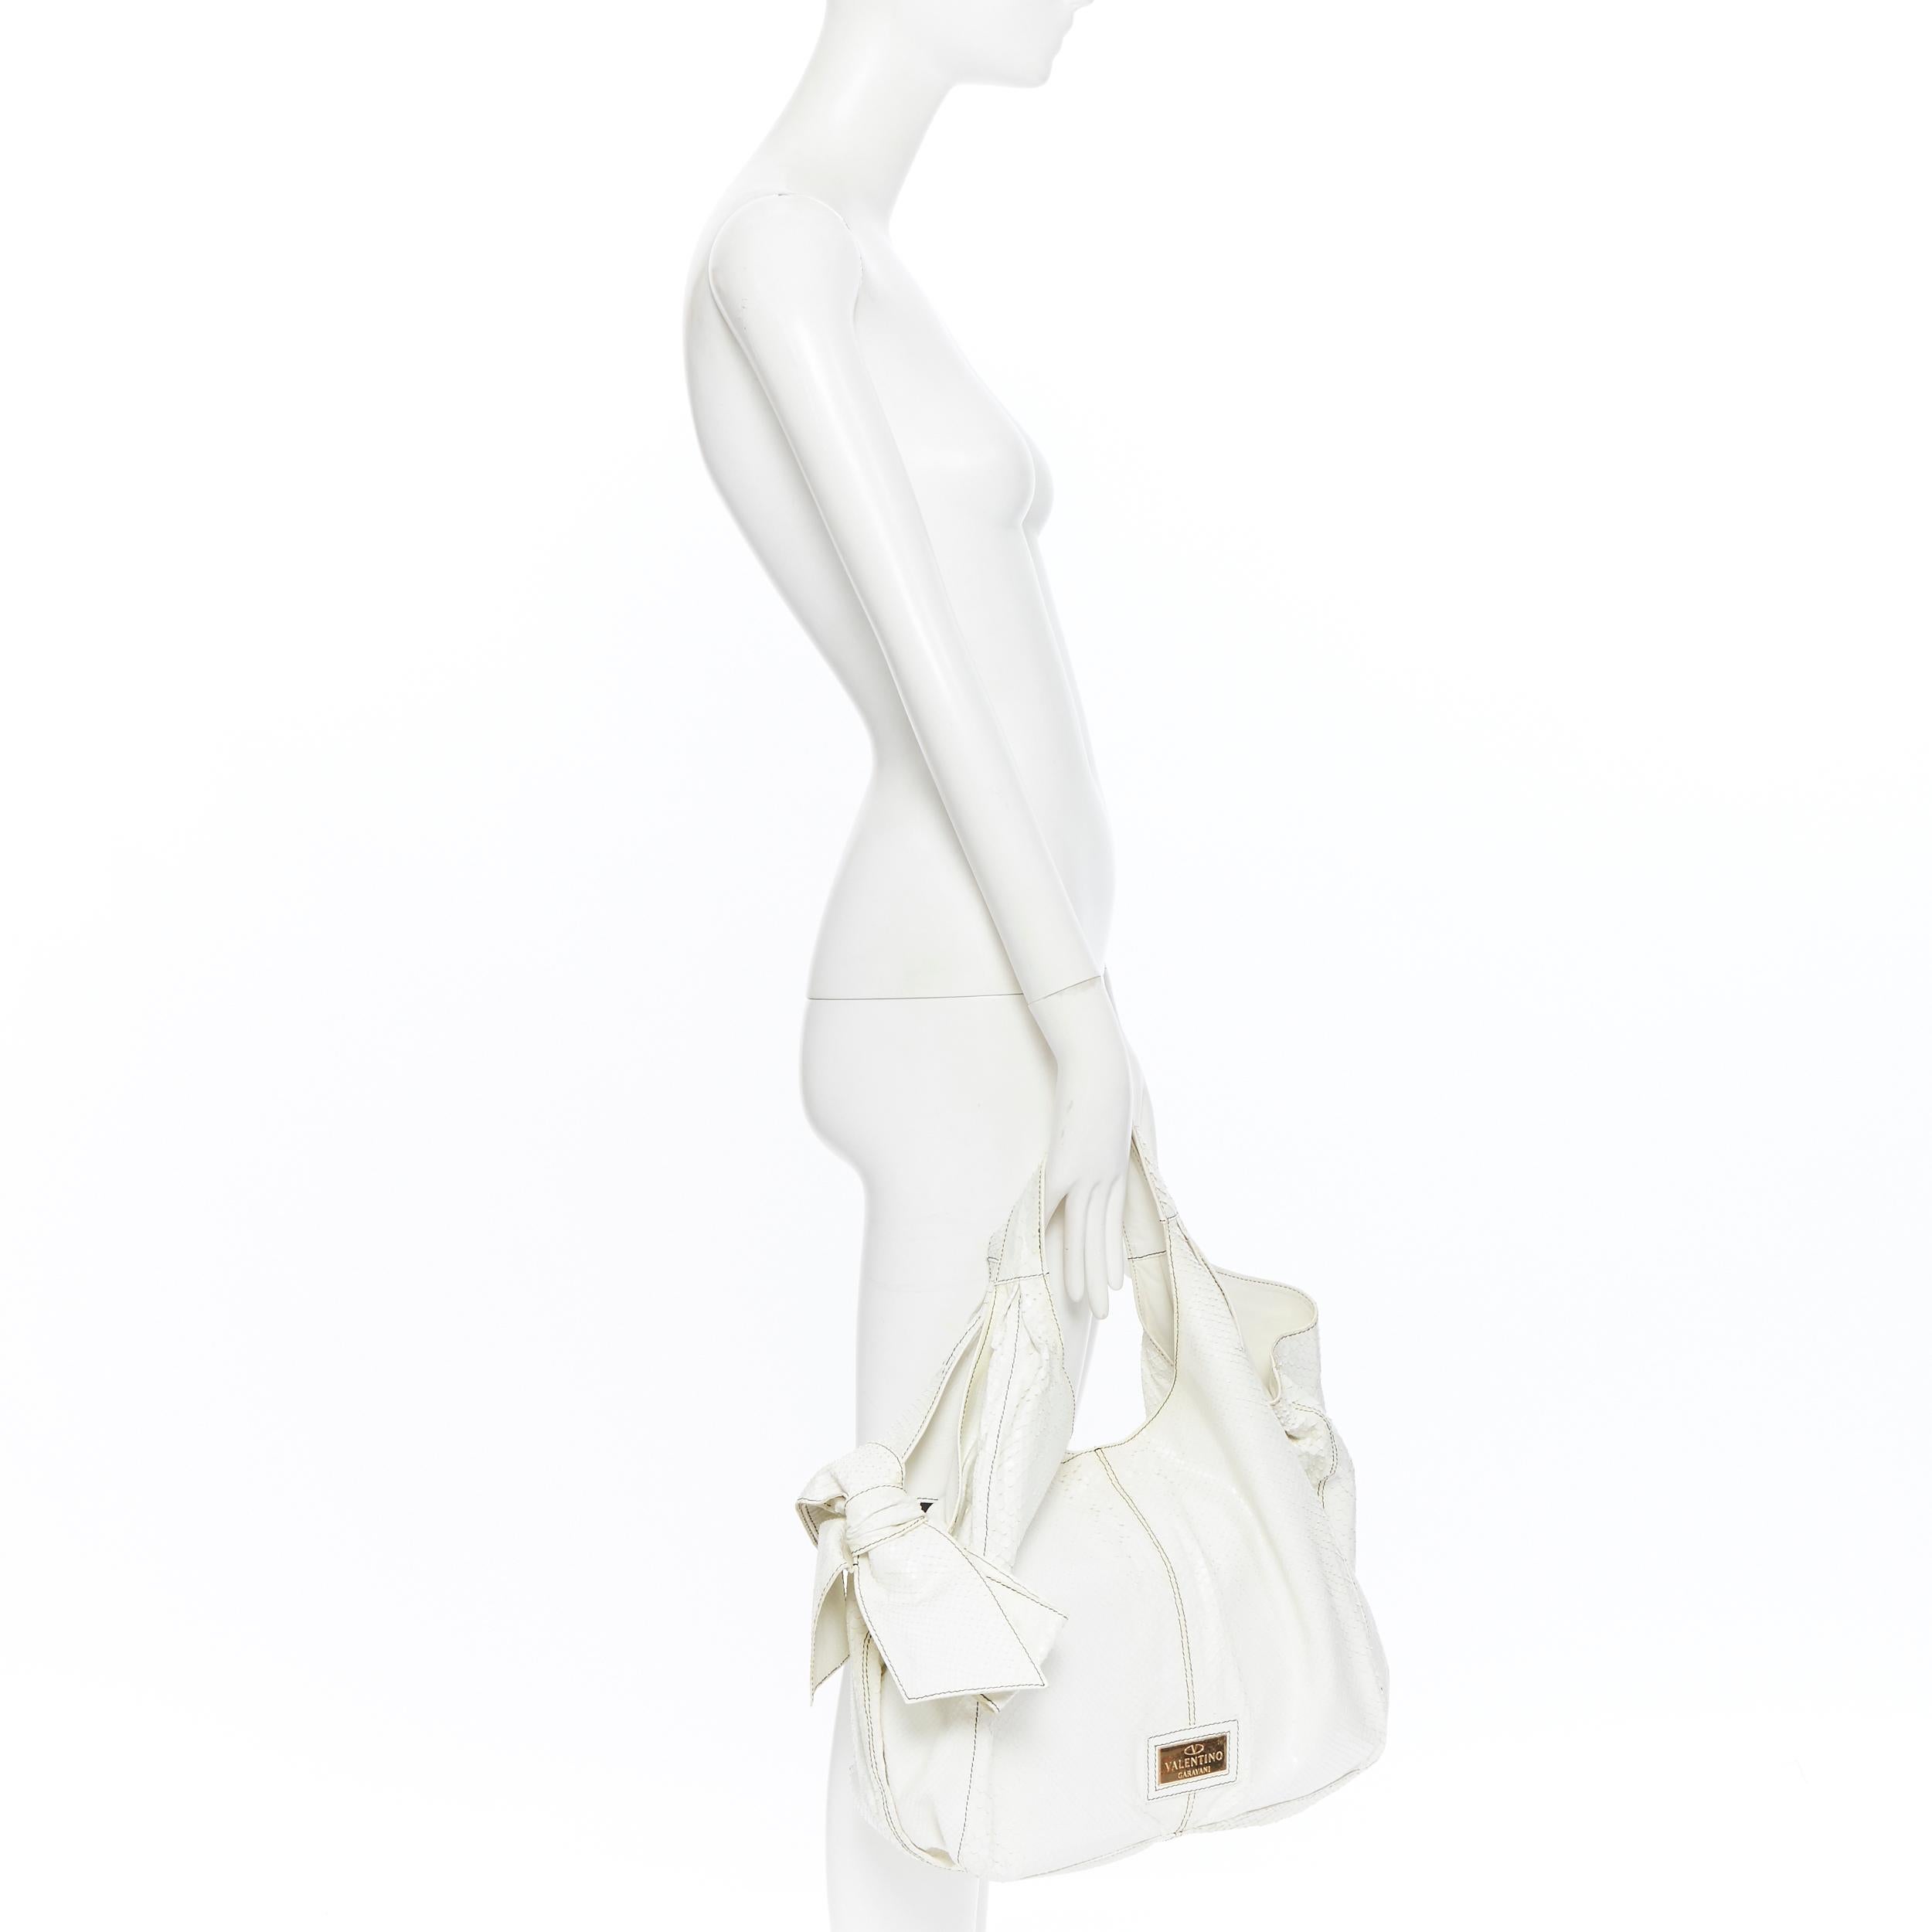 VALENTINO GARAVANI white scaled leather large box top handle large hobo bag
Brand: Valentino
Model Name / Style: Tote bag
Material: Leather; scaled leather
Color: White
Pattern: Solid
Extra Detail: Shoulder Strap.
Made in: Italy

CONDITION: